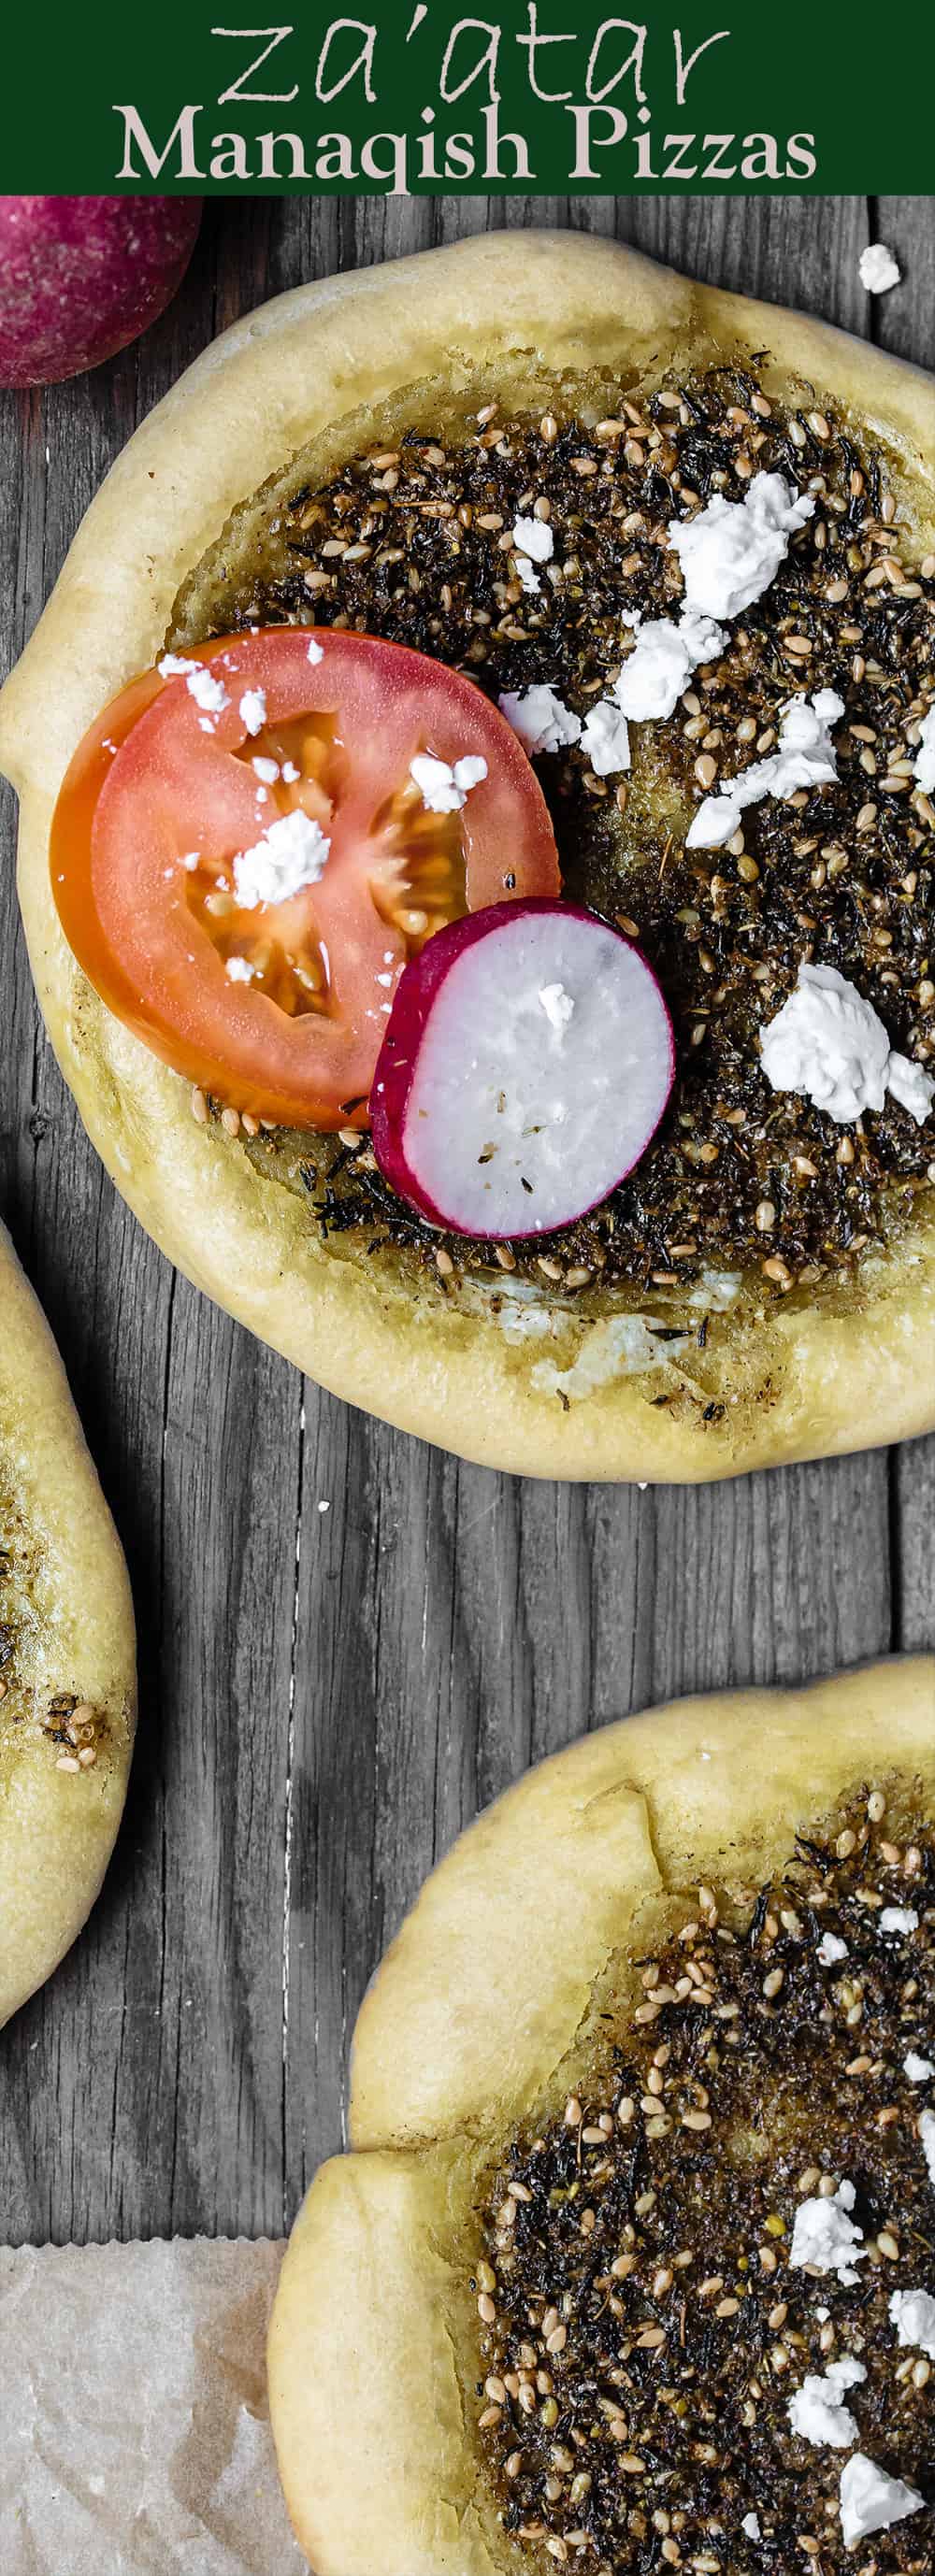 Za'atar Manaqish (Manakish) Recipe | The Mediterranean Dish. Middle Eastern homemade flatbread with olive oil and Za'atar spice. Easy vegan recipe that's perfect for snack, appetizer, or even brunch. See the full recipe on TheMediterraneanDish.com #mediterraneandiet #mediterraneanrecipe #mediterraneandietrecipe #manakish #flatbread